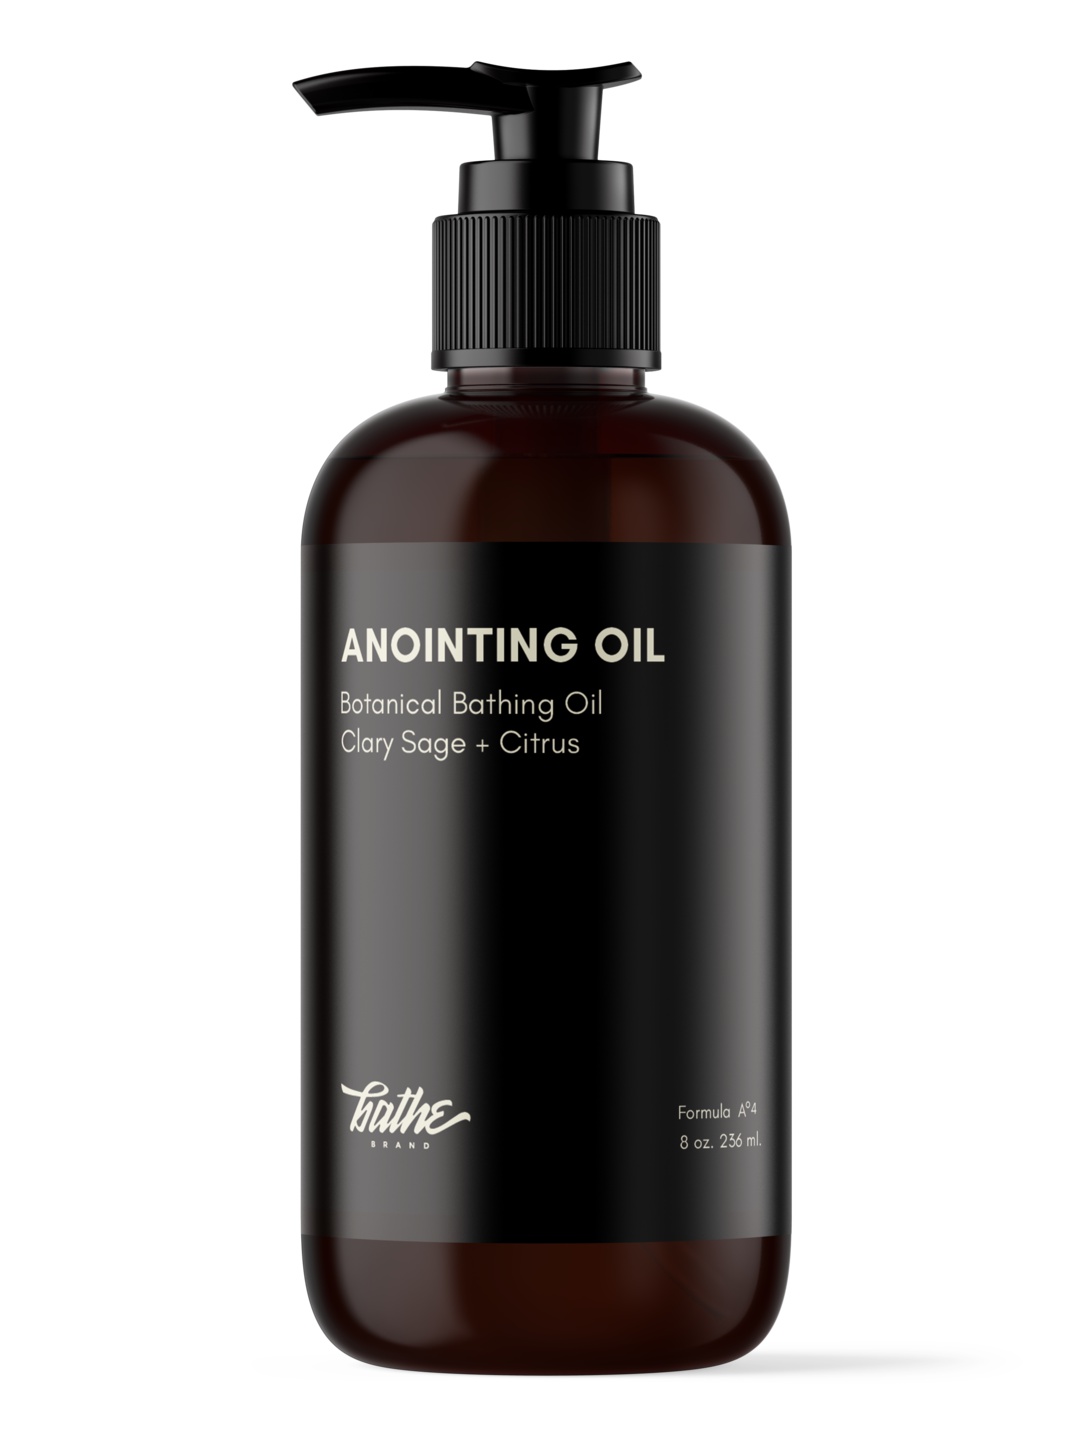 Bathe Brand Anointing Oil: Clary Sage + Citrus